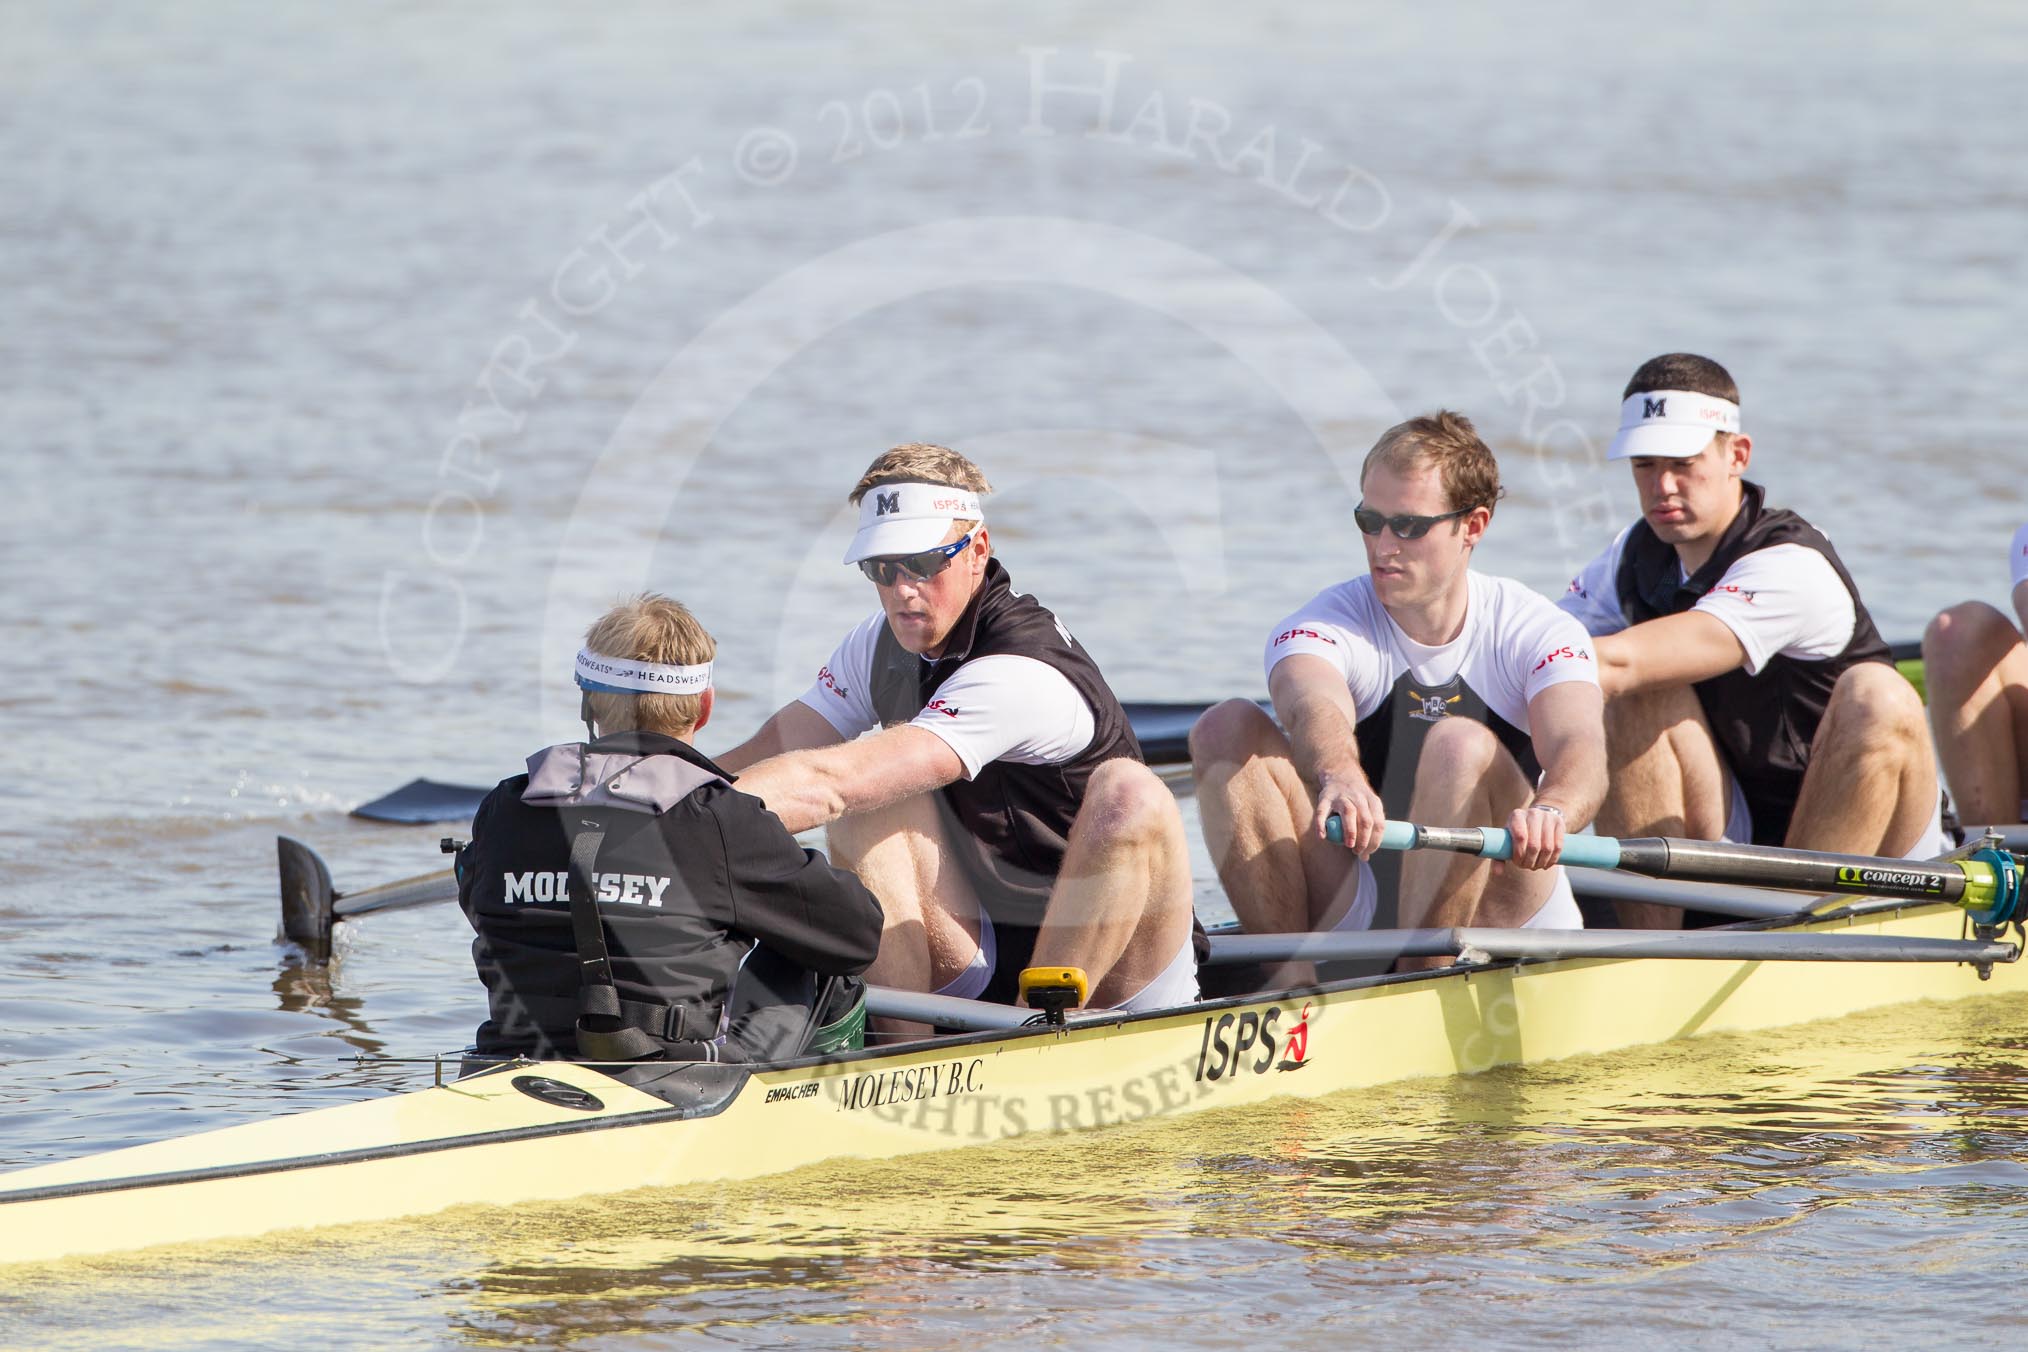 The Boat Race season 2012 - fixture CUBC vs Molesey BC.




on 25 March 2012 at 14:40, image #15